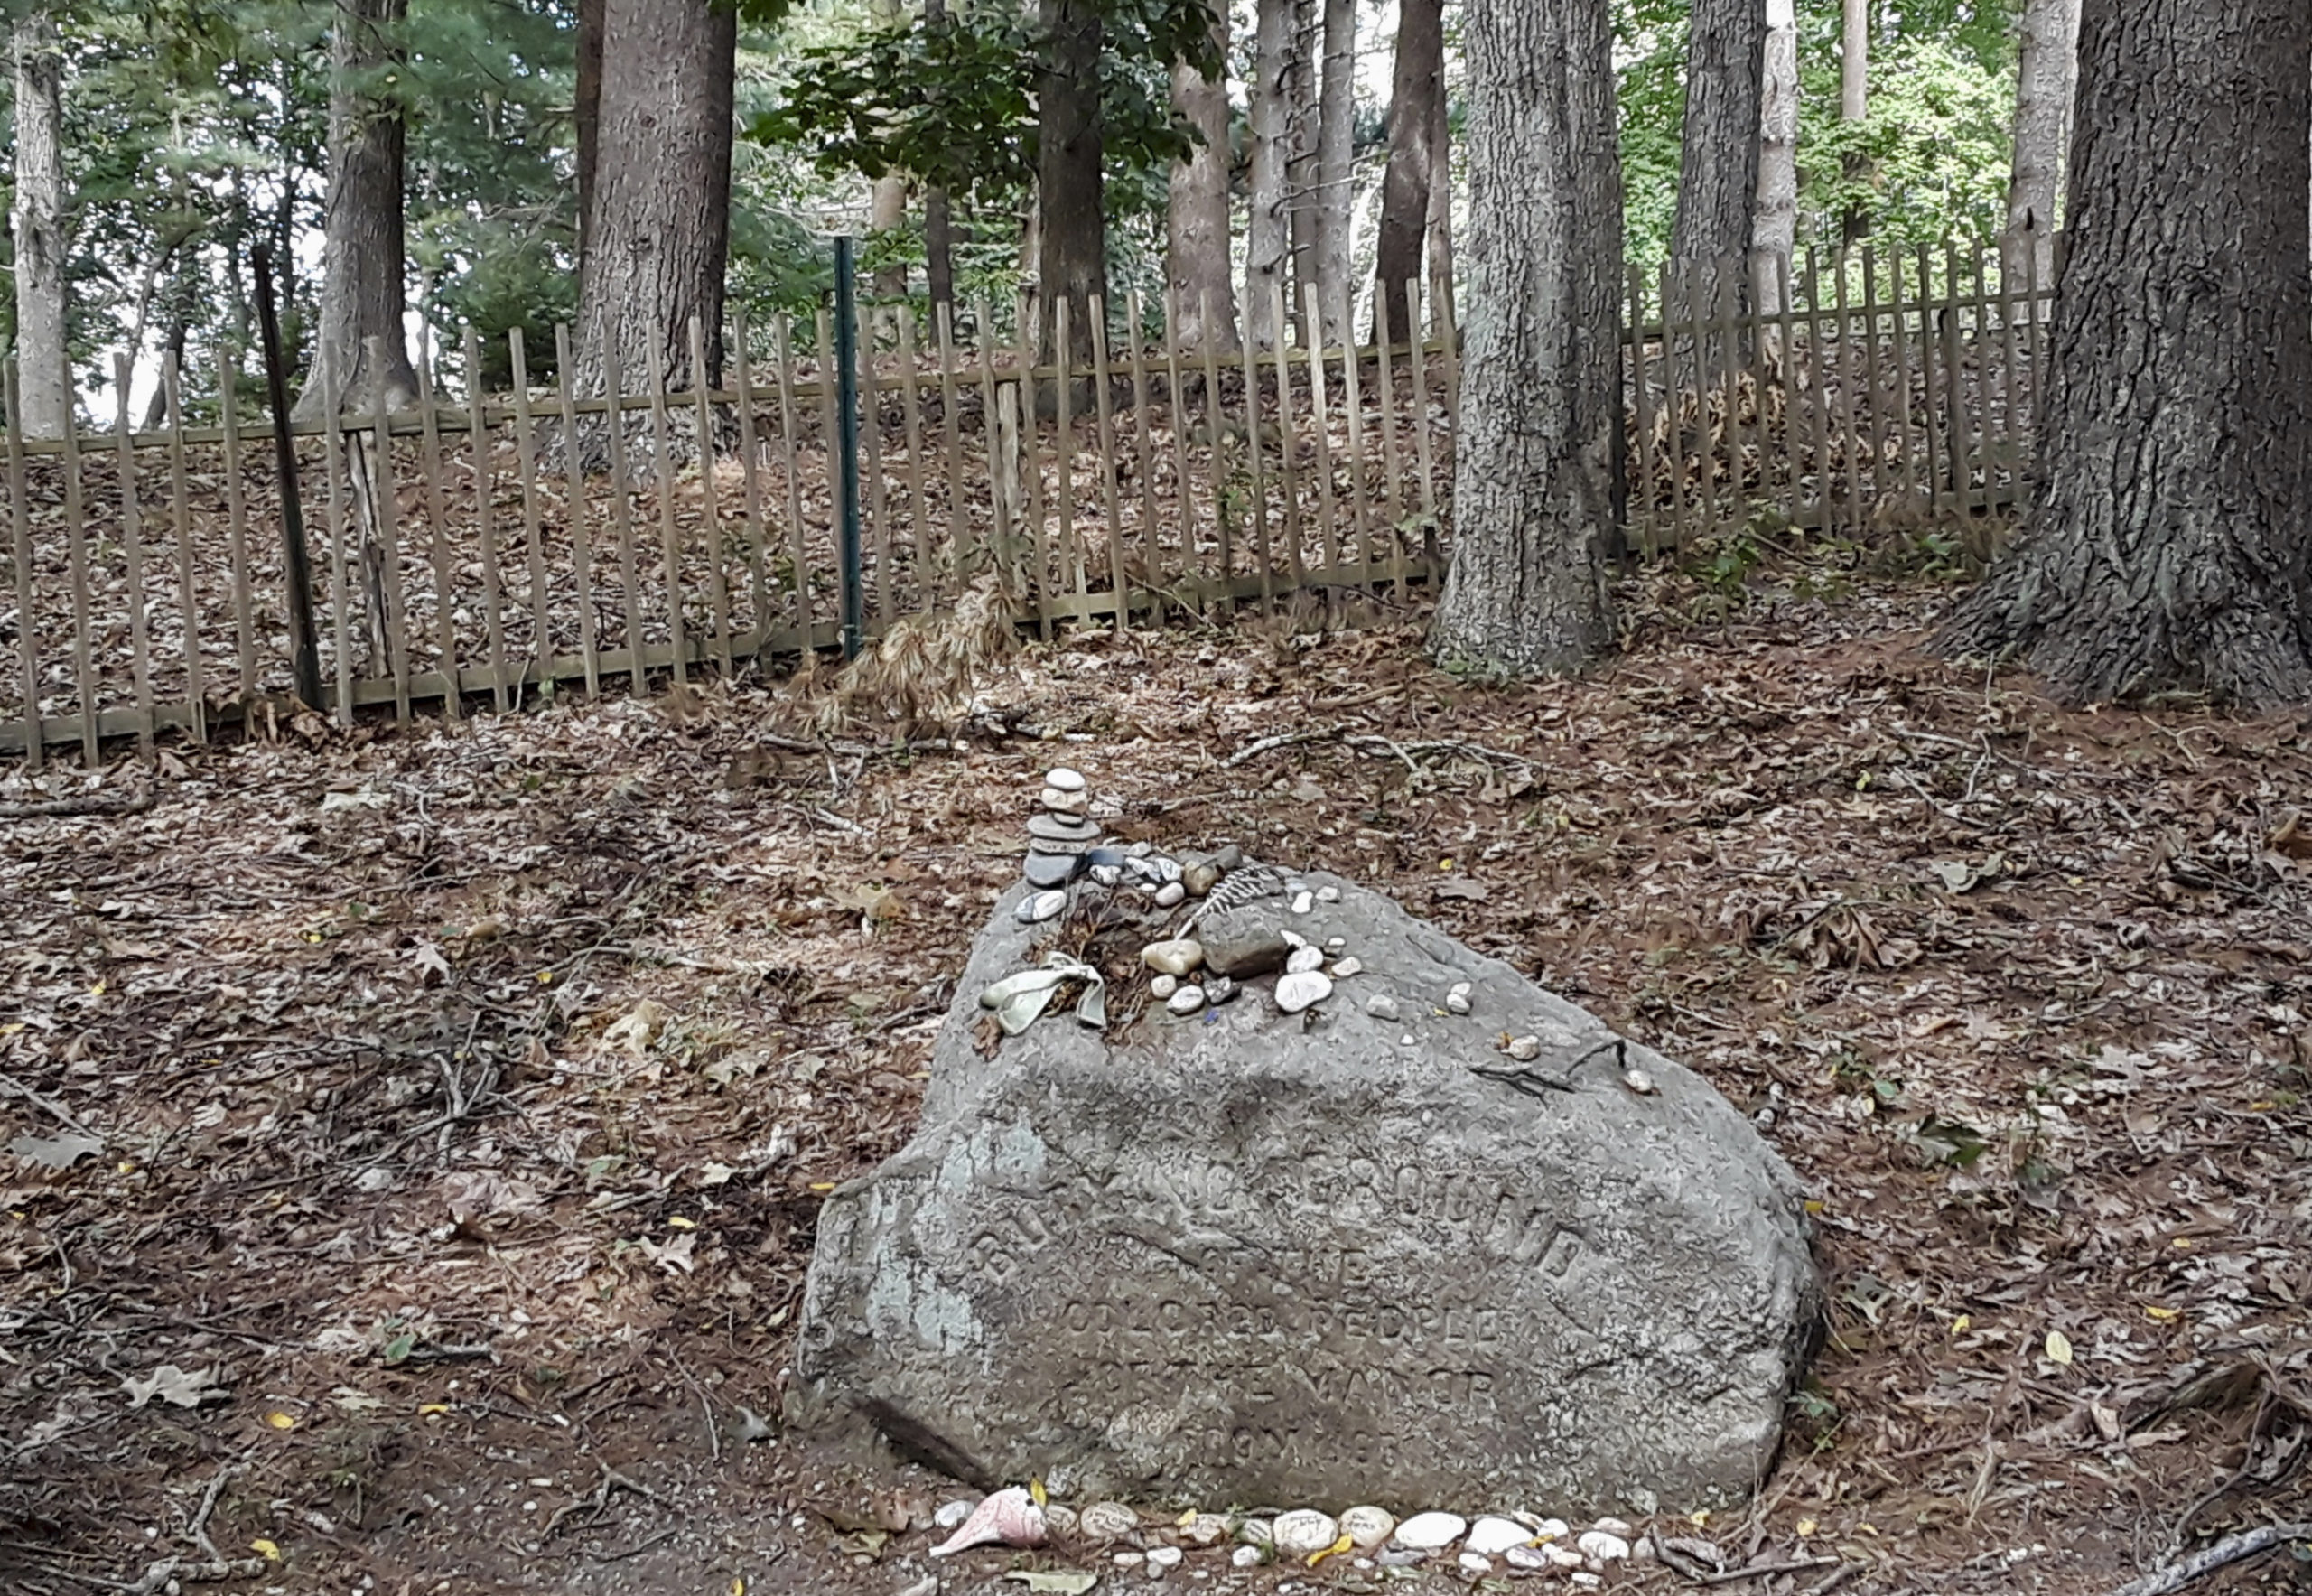 The Stone commemorating the Afro-Indigenous Burial Ground at Sylvester Manor where there may be up to 200 persons are buried. The stone reads, 